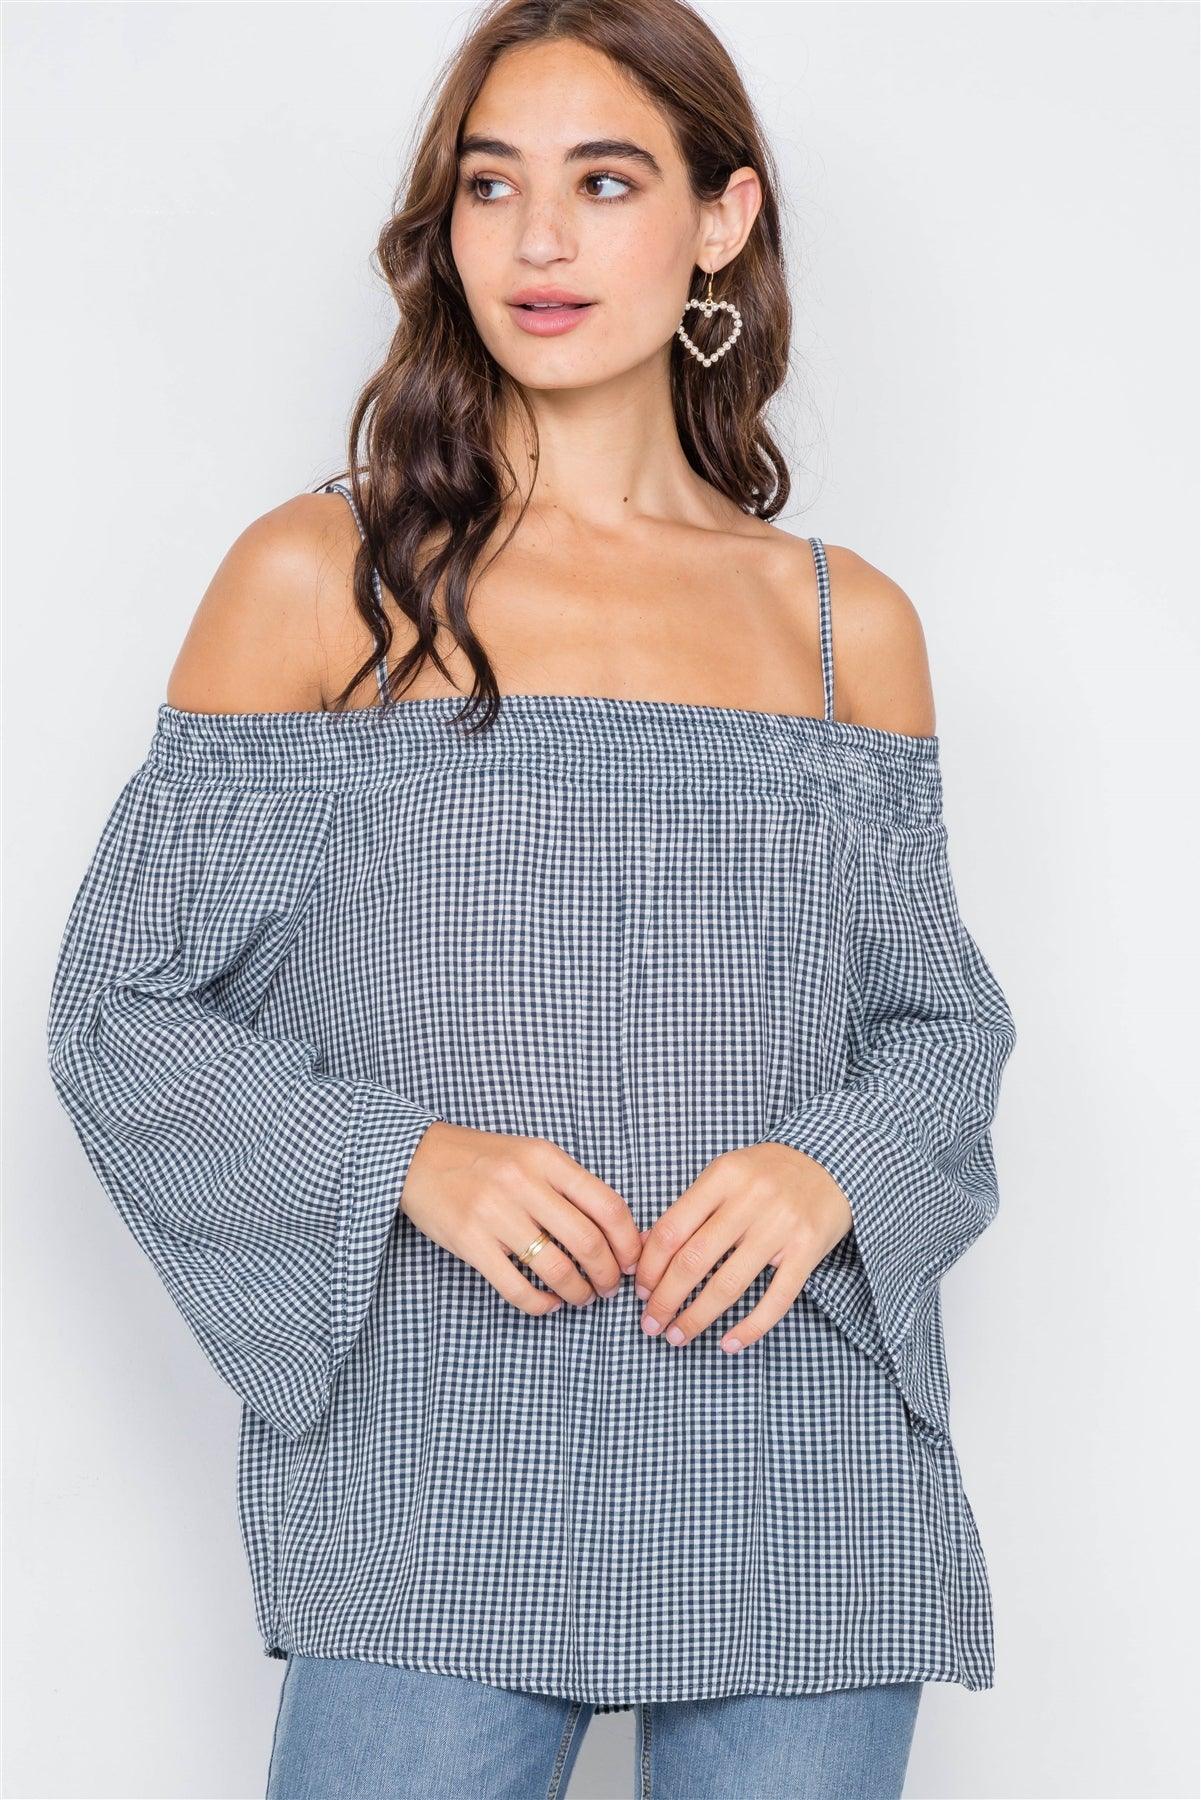 Navy & White Gingham Plaid Off-The-Shoulder Top /2-2-2